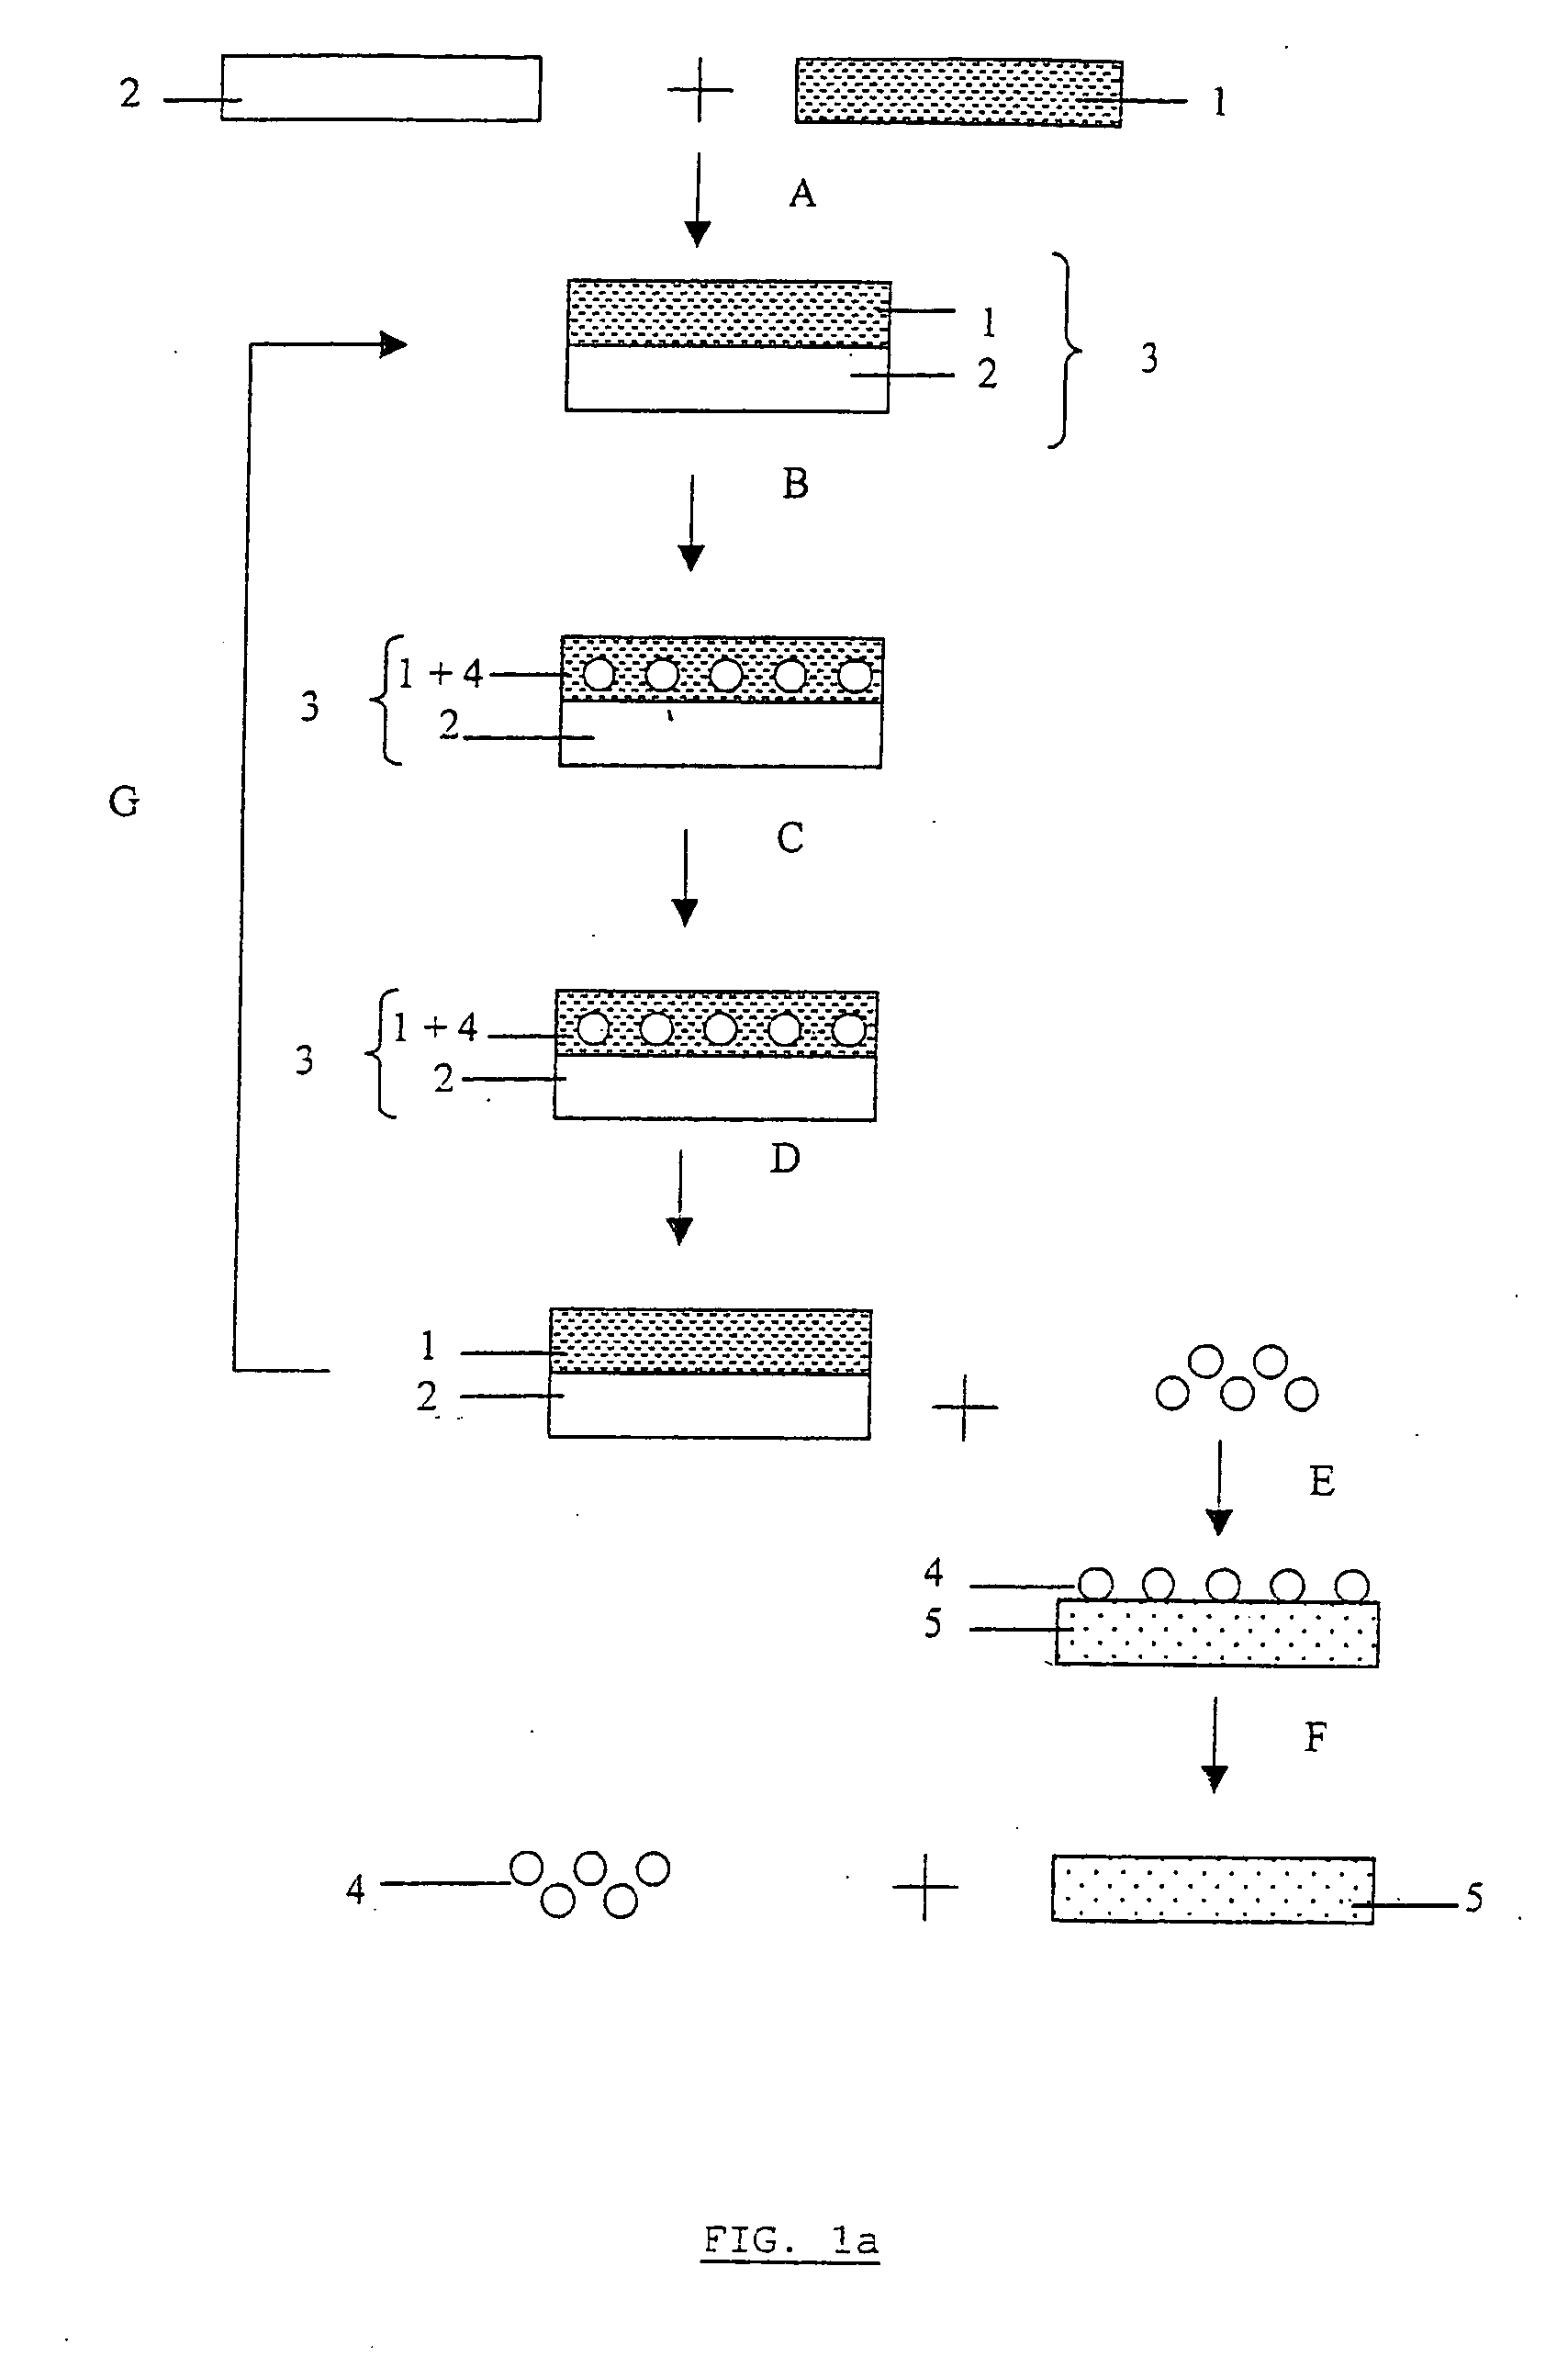 Method and device for production of radio-isotopes from a target